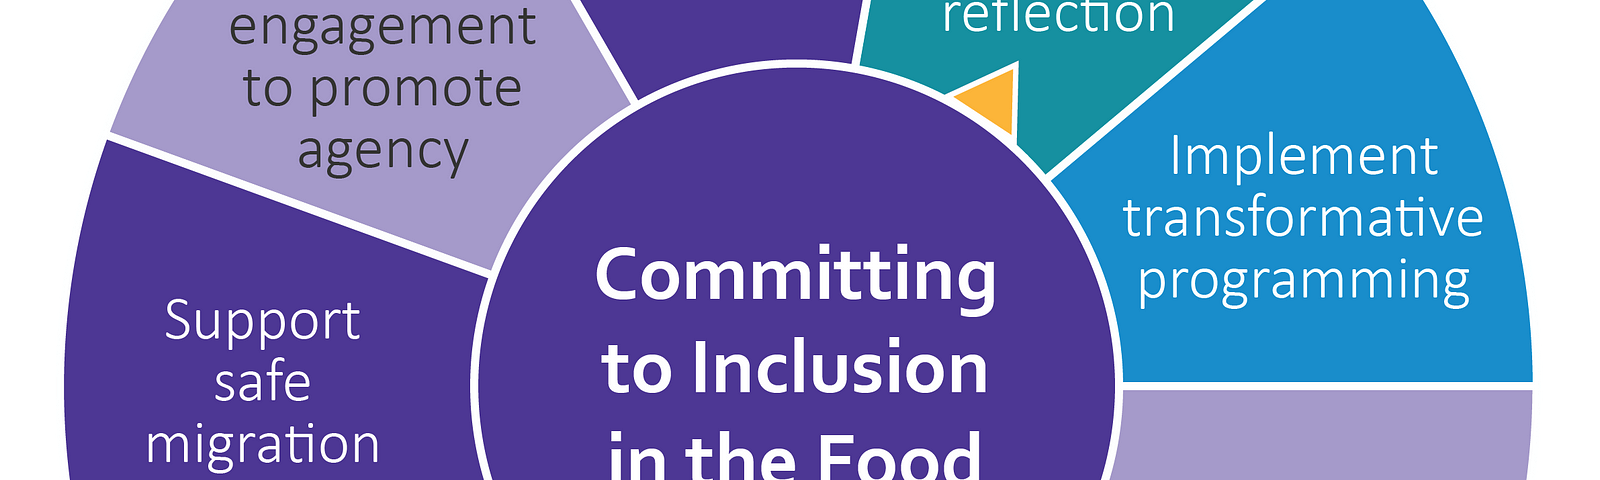 A graphic illustration of Committing to Inclusion in the Food Crisis, as a wheel. In the center of the wheel is “Committing to Inclusion in the Food Crisis”. Clockwise from the top: Improve data collection; regular data analysis and reflection; implement transformative programming; incorporative programming; incorporate lessons learned; standalone budgets for gender and youth; no sectoral siloes; engage the private sector; support safe migration; meaningful engagement to promote agency.